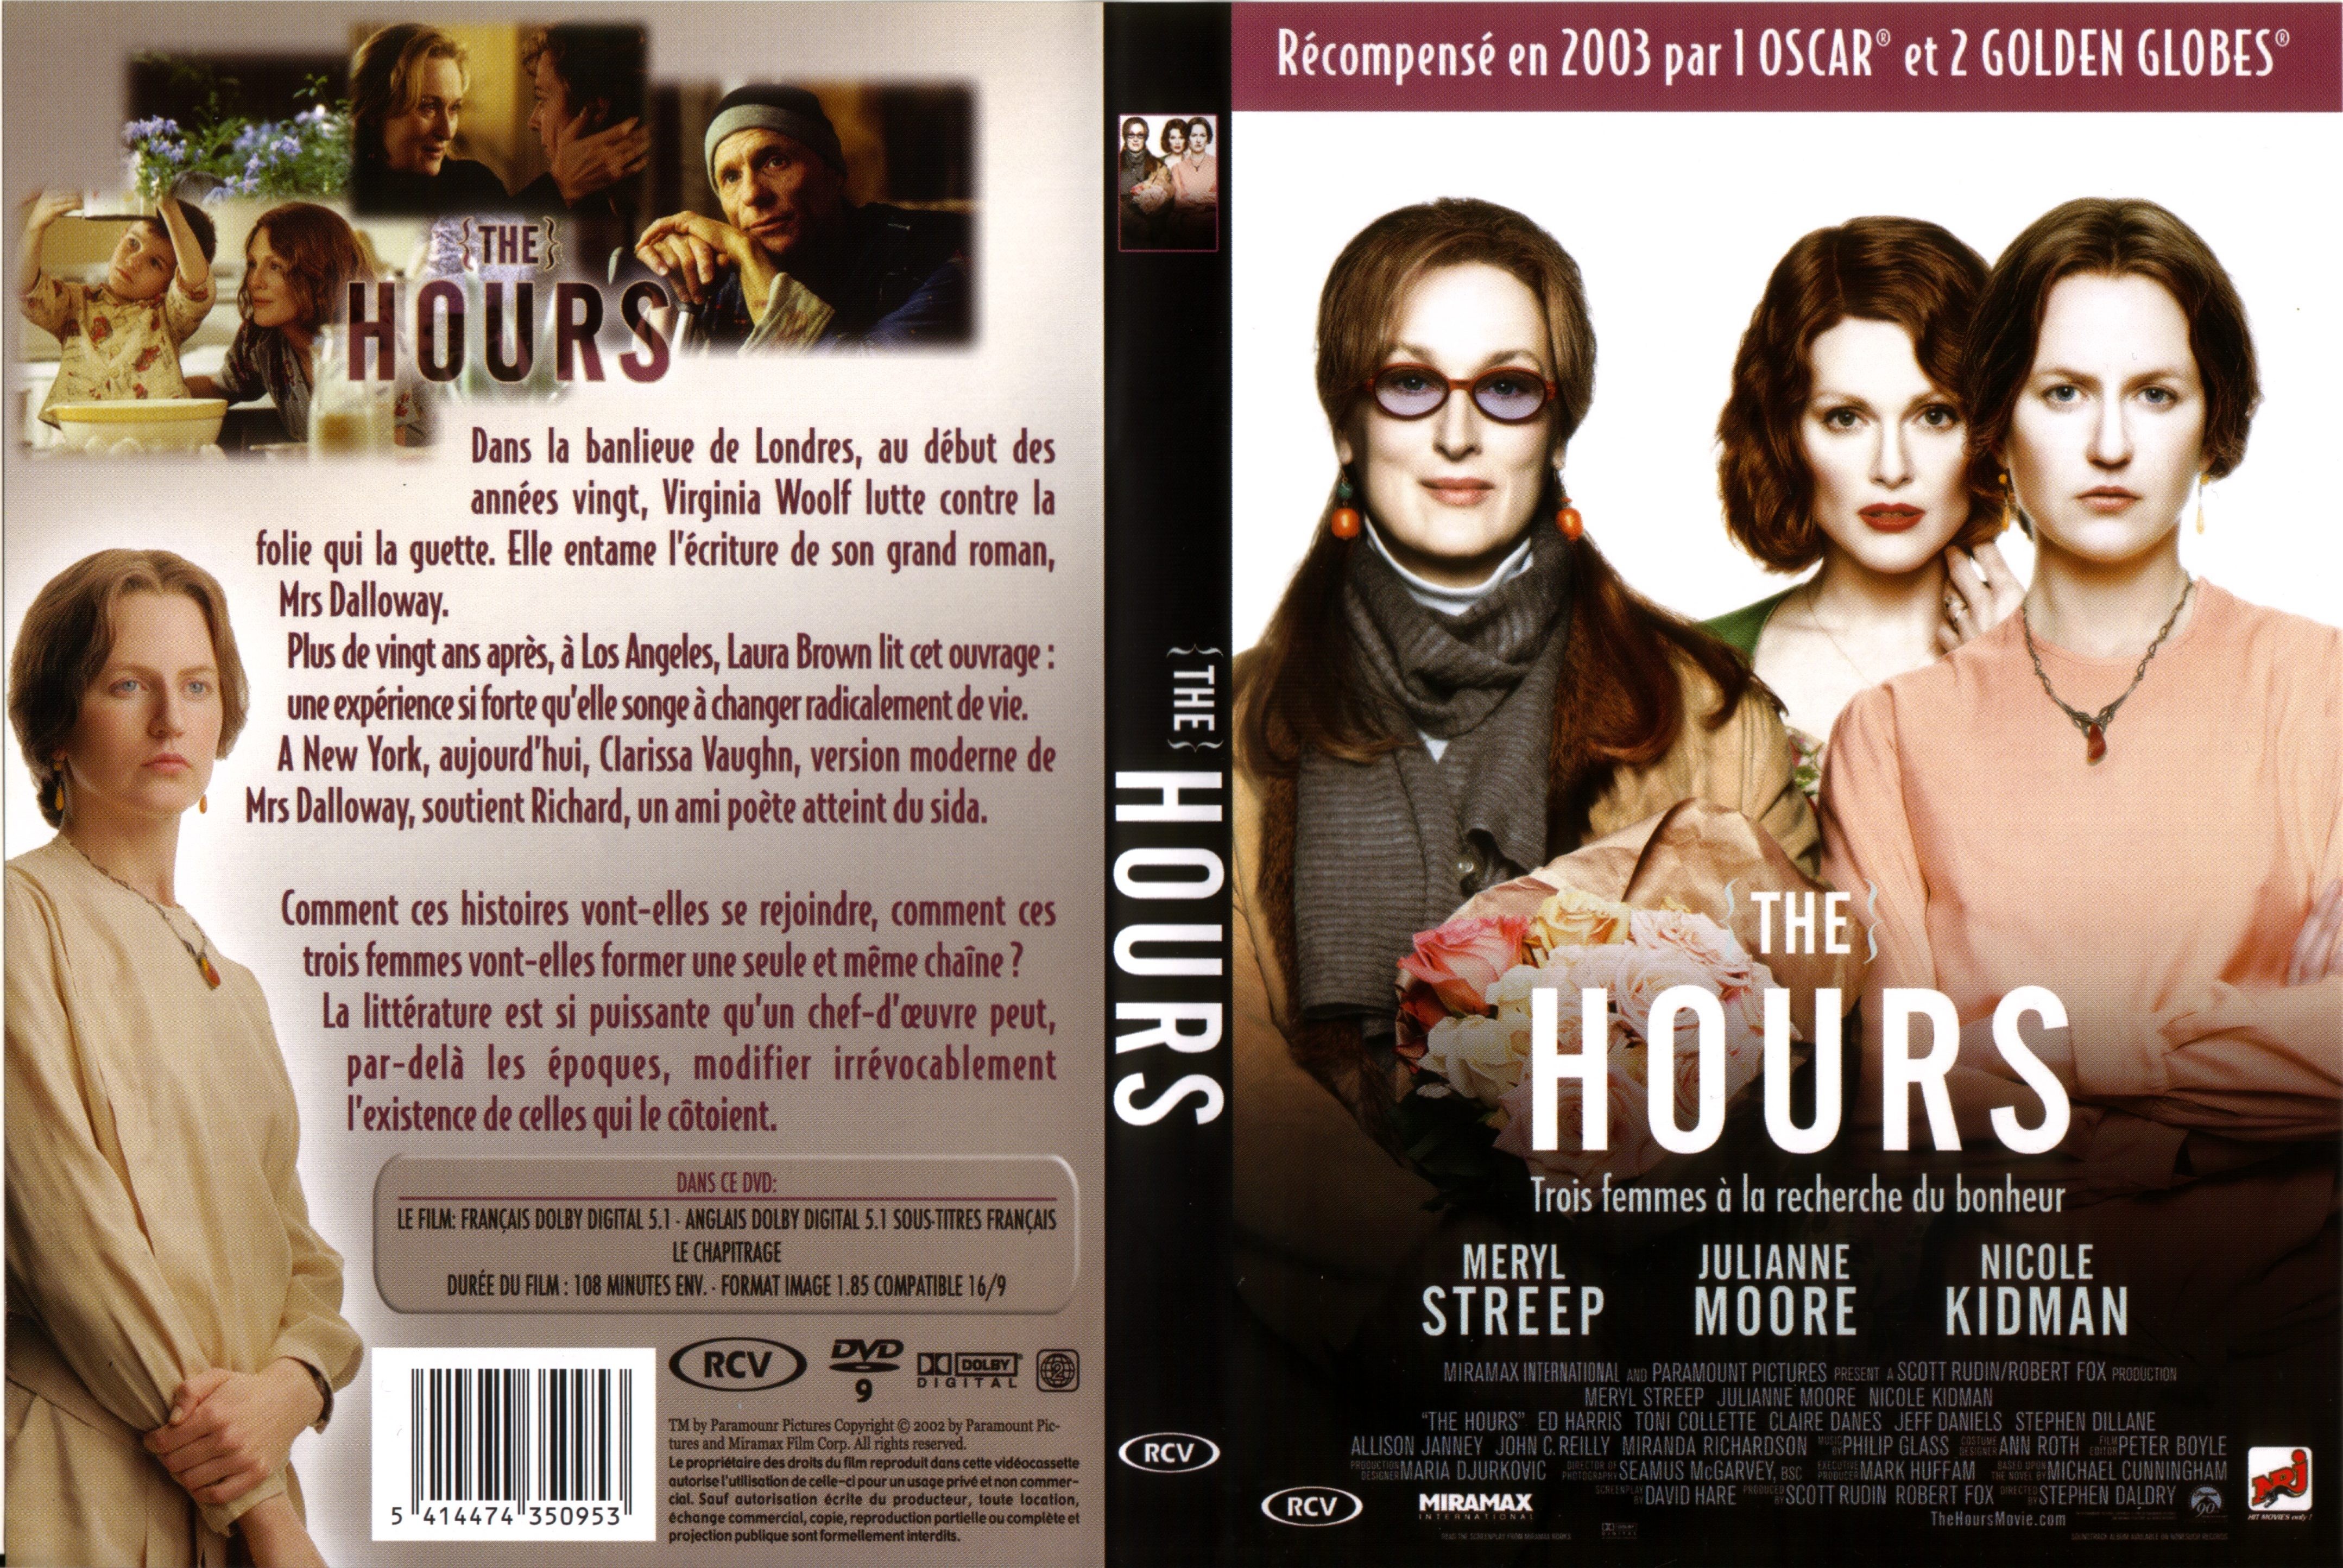 Jaquette DVD The hours